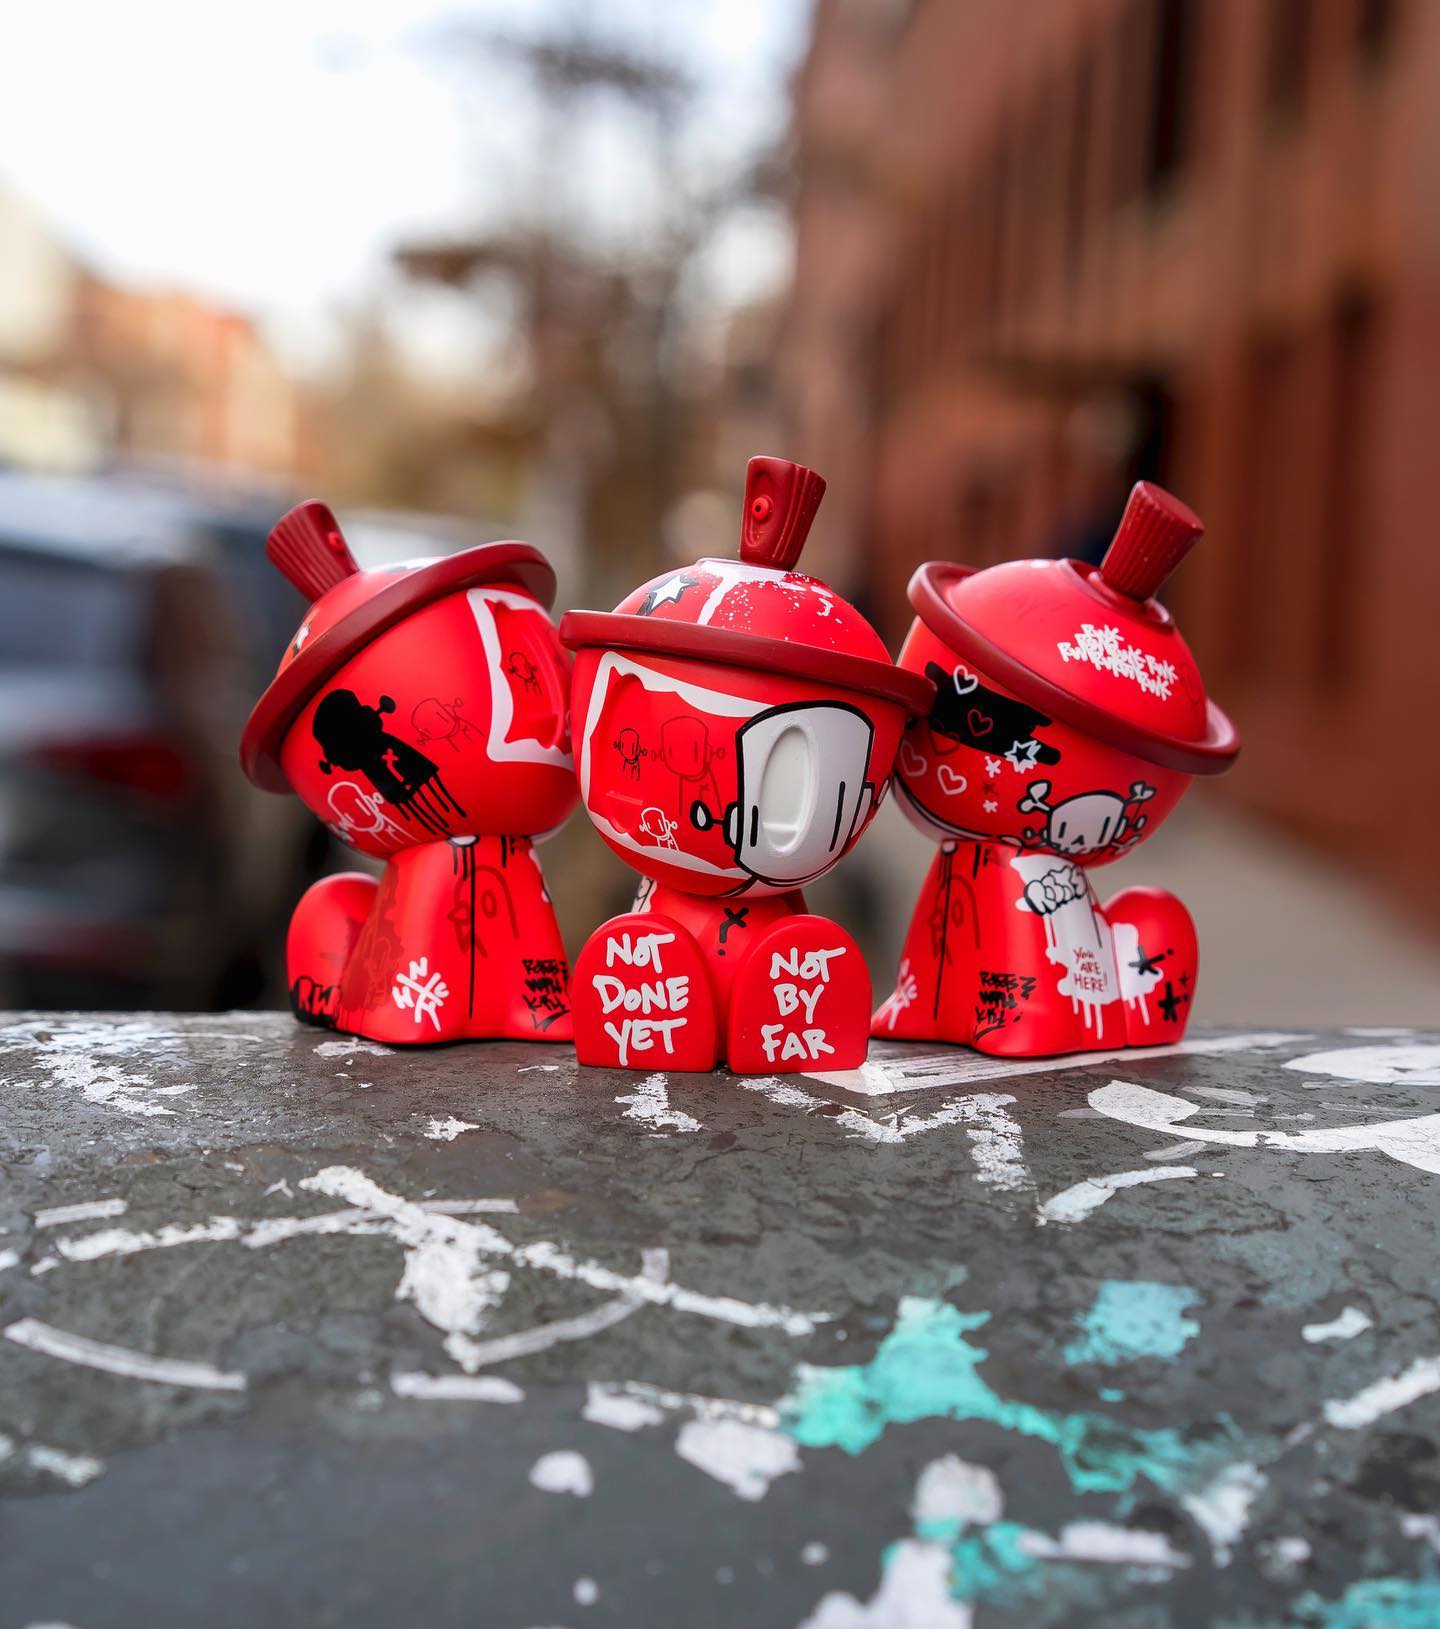 https://media.thetoychronicle.com/wp-content/uploads/2022/12/Canbot-3oz-Code-Red-myplasticheart-exclusive-by-ChrisRWK-x-Czee-x-Clutter-Studio-qwrrqw.jpeg